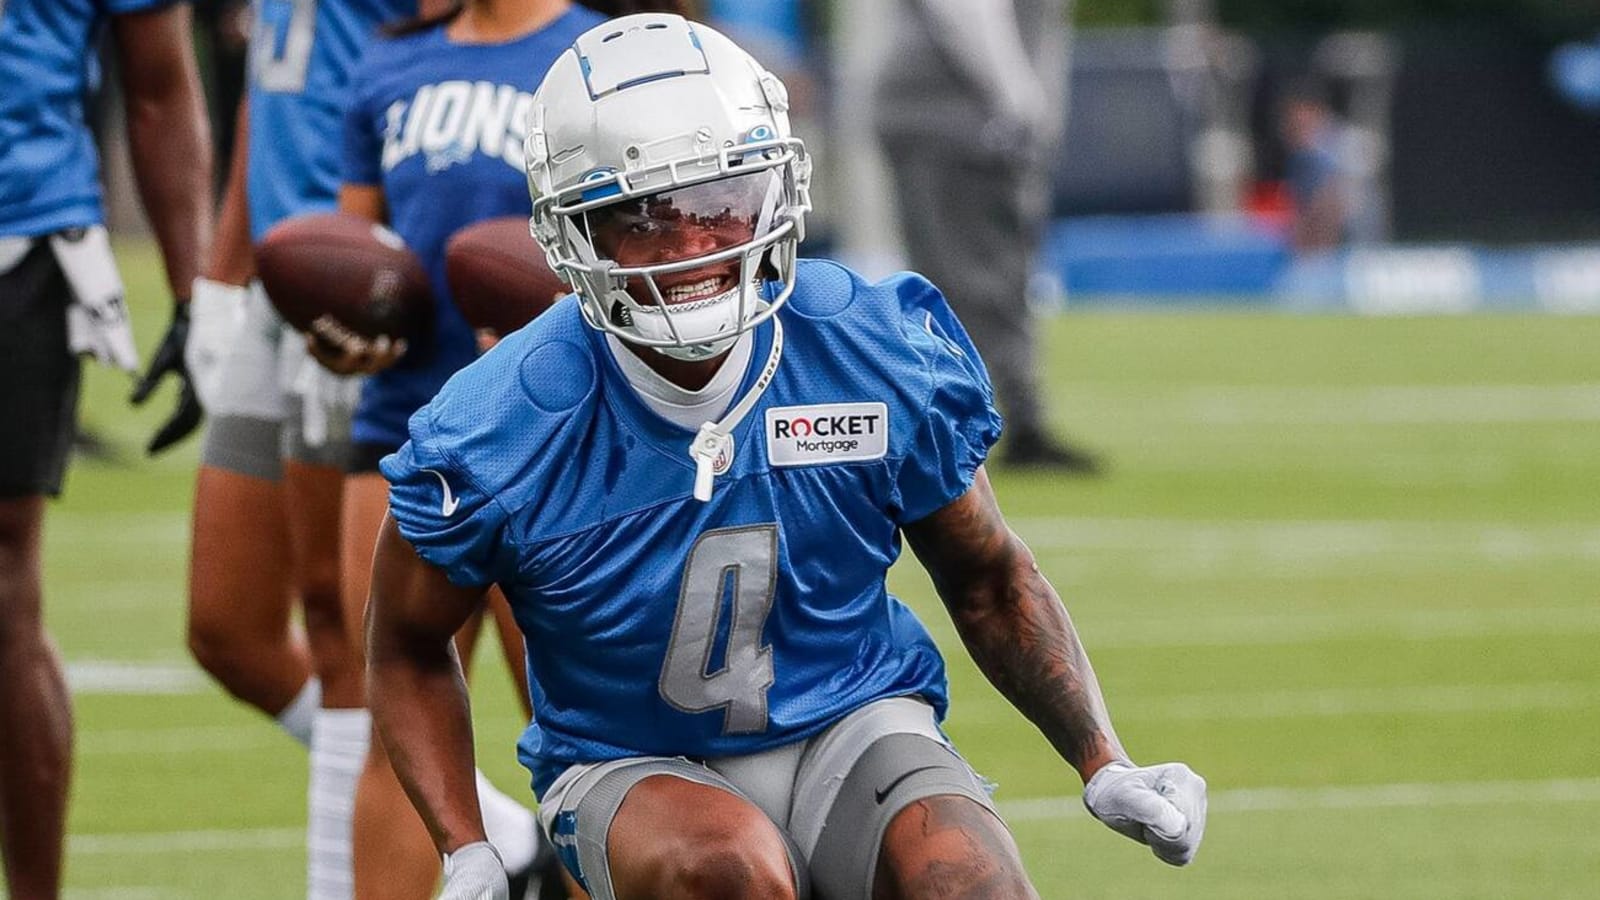 Lions place WR DJ Chark on IR with ankle injury